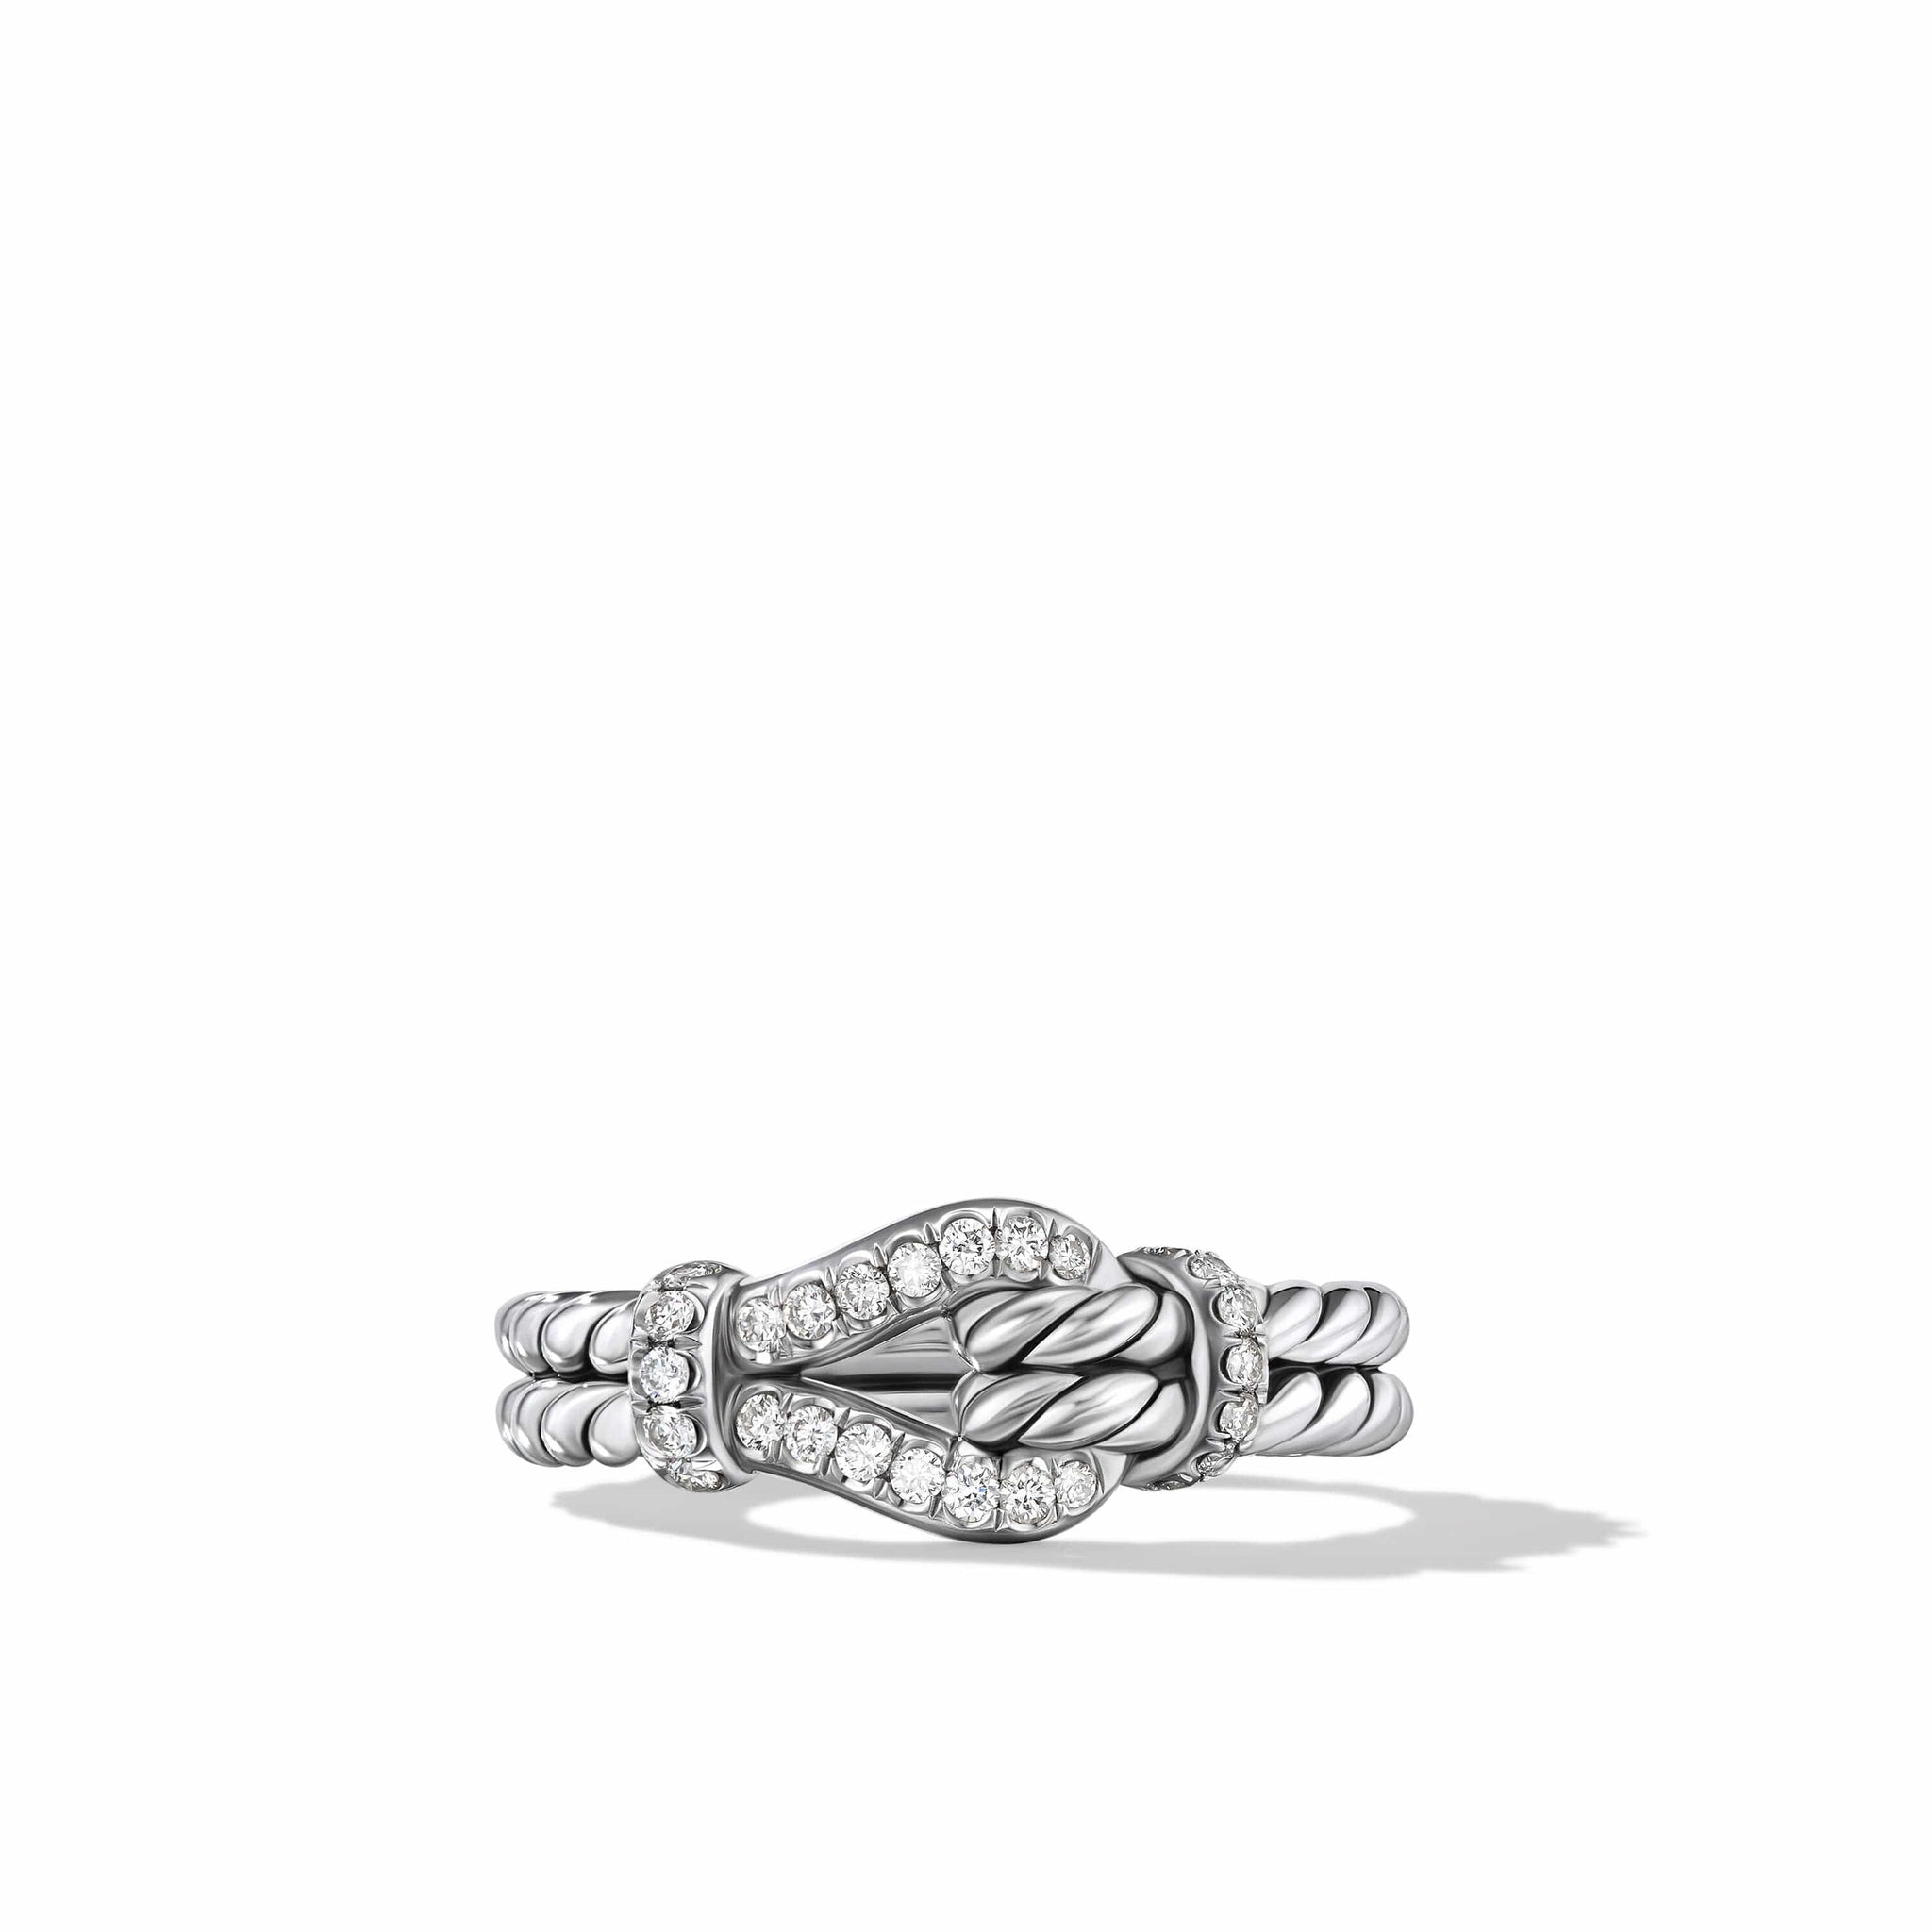 Thoroughbred Loop Ring in Sterling Silver with Pavé Diamonds